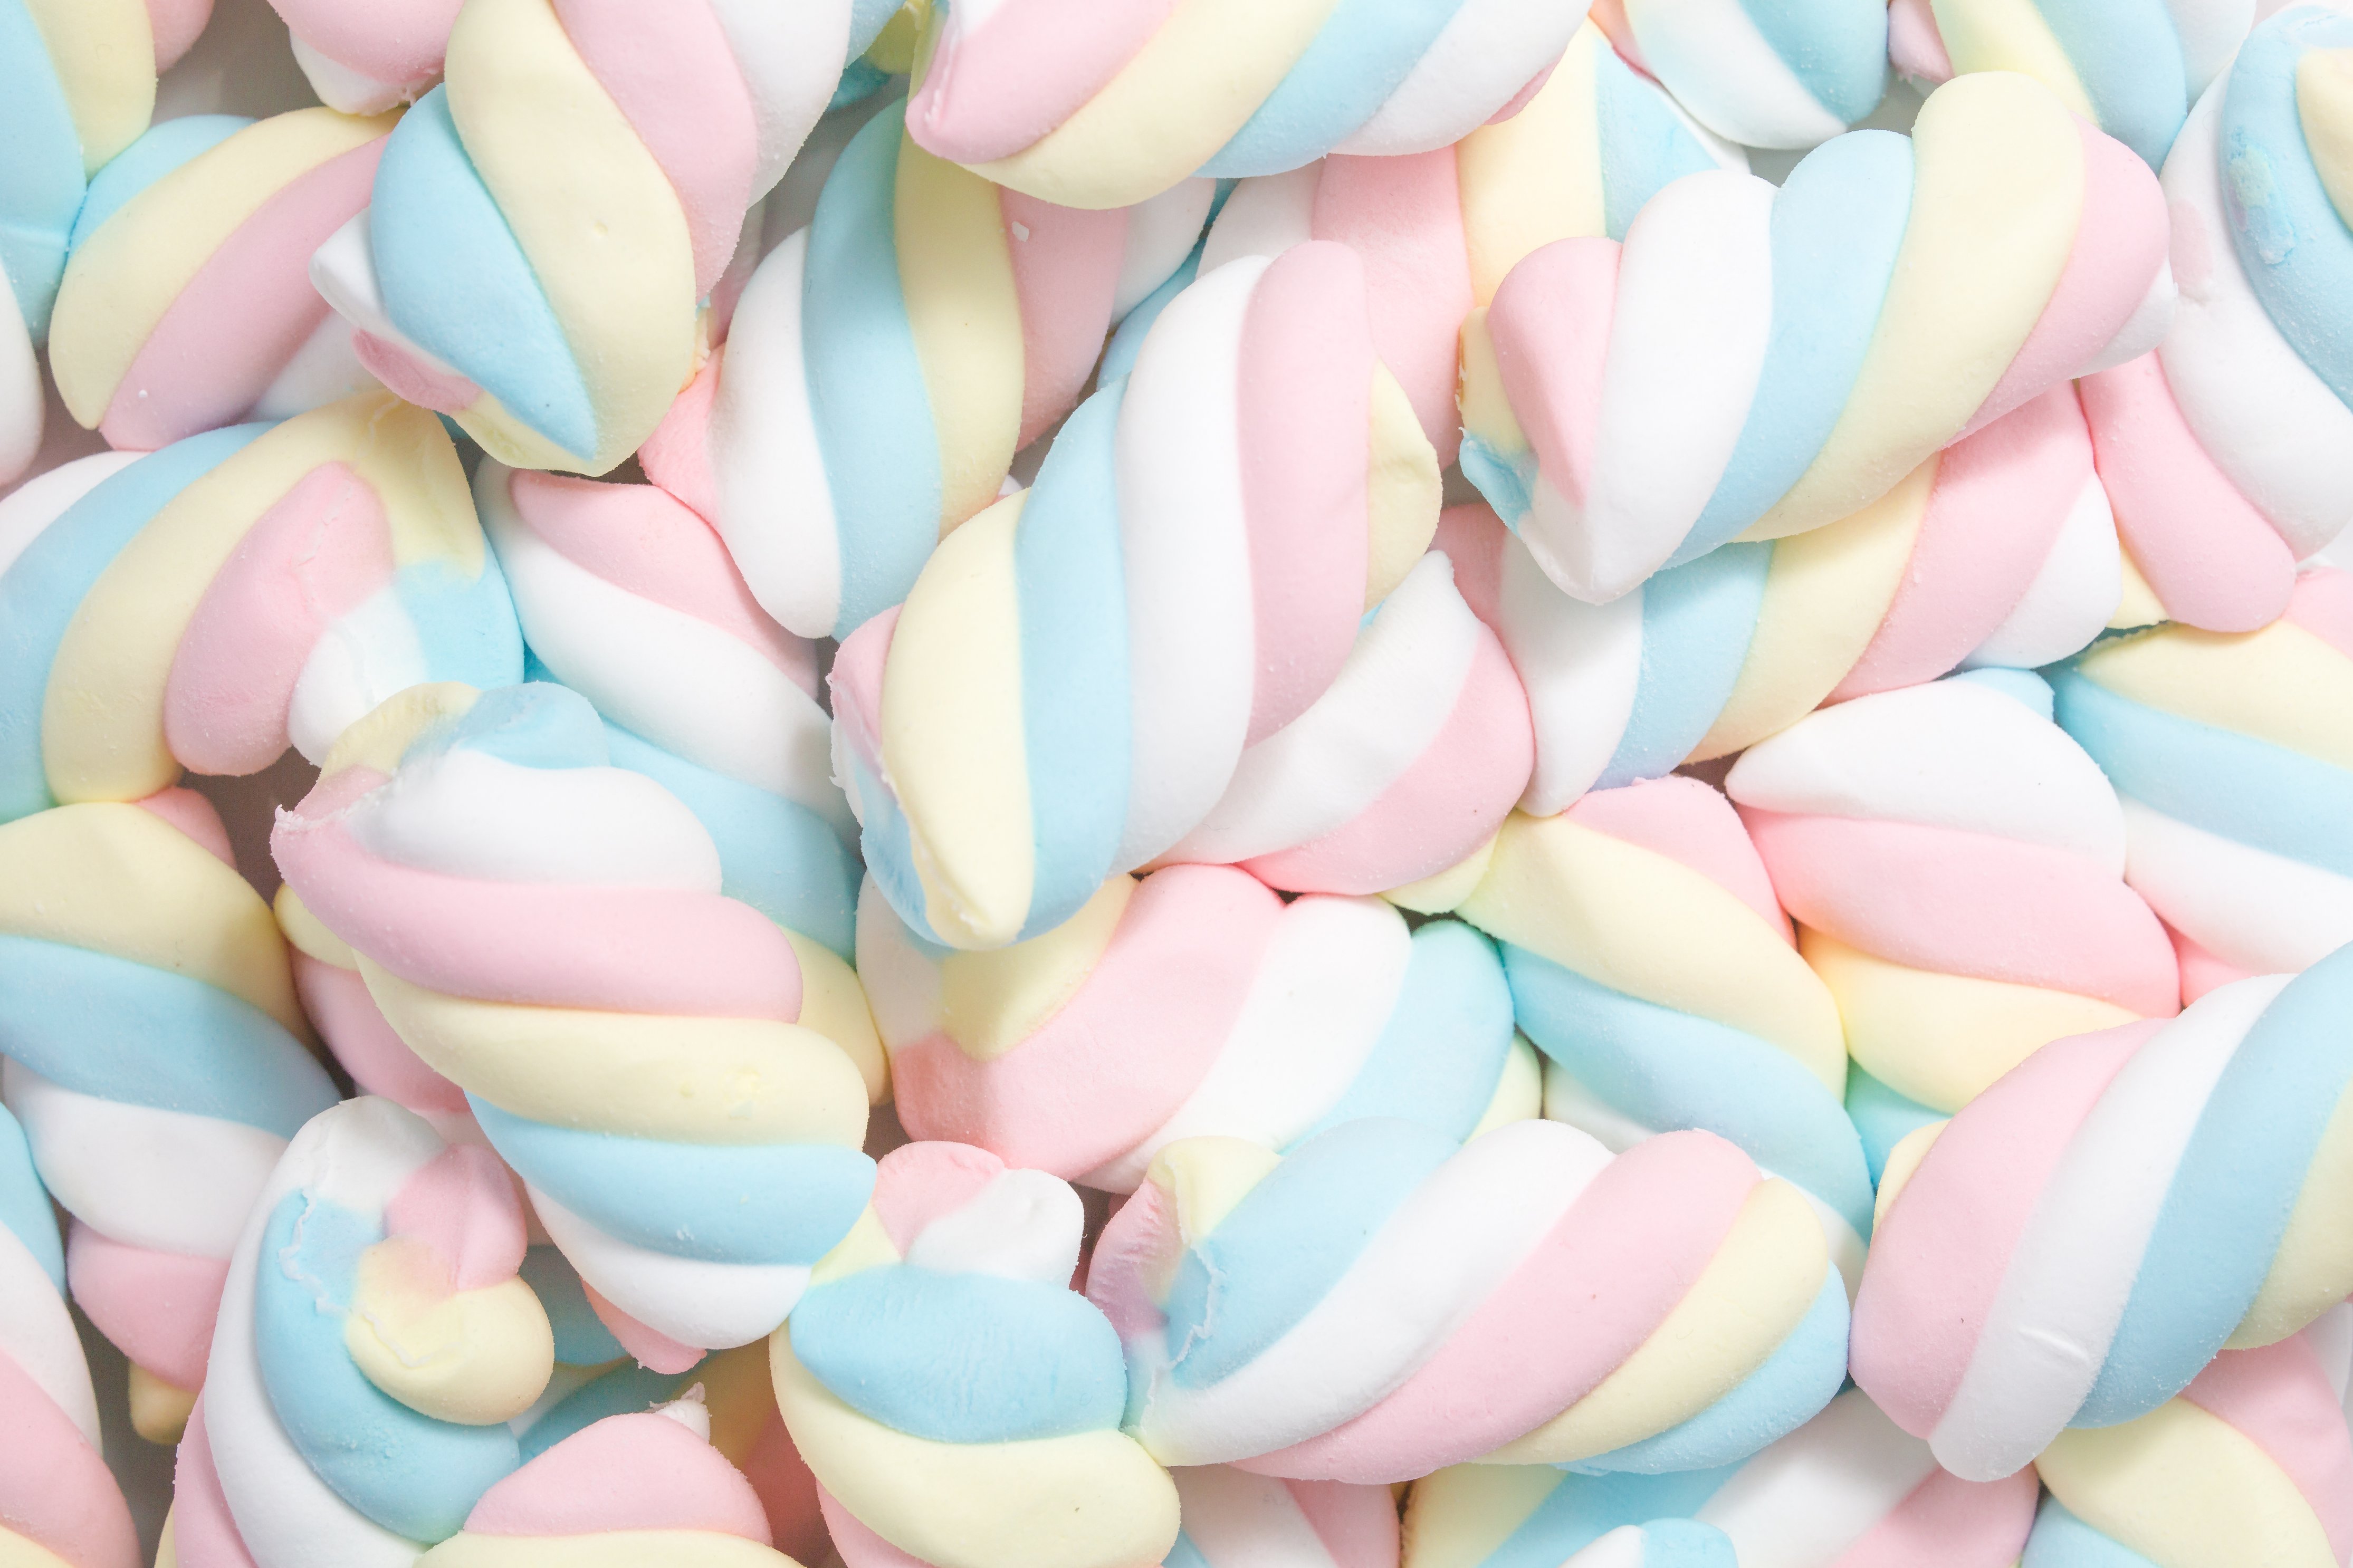 149075 download wallpaper food, sweet, spiral, marshmallow, zephyr, pastel screensavers and pictures for free